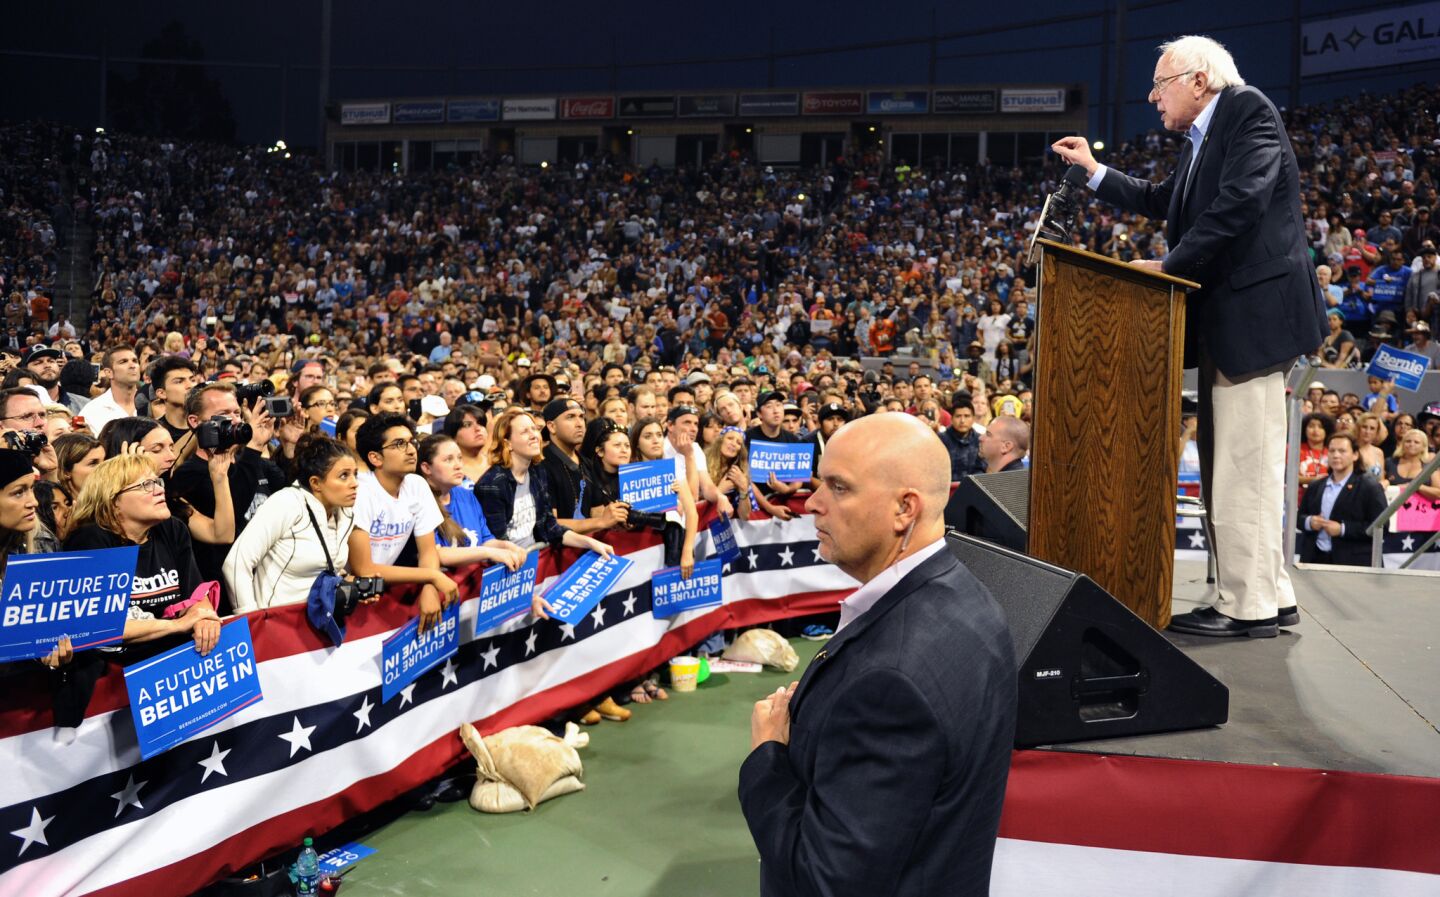 Security looks on as Bernie Sanders addresses supporters at StubHub Center in Carson.